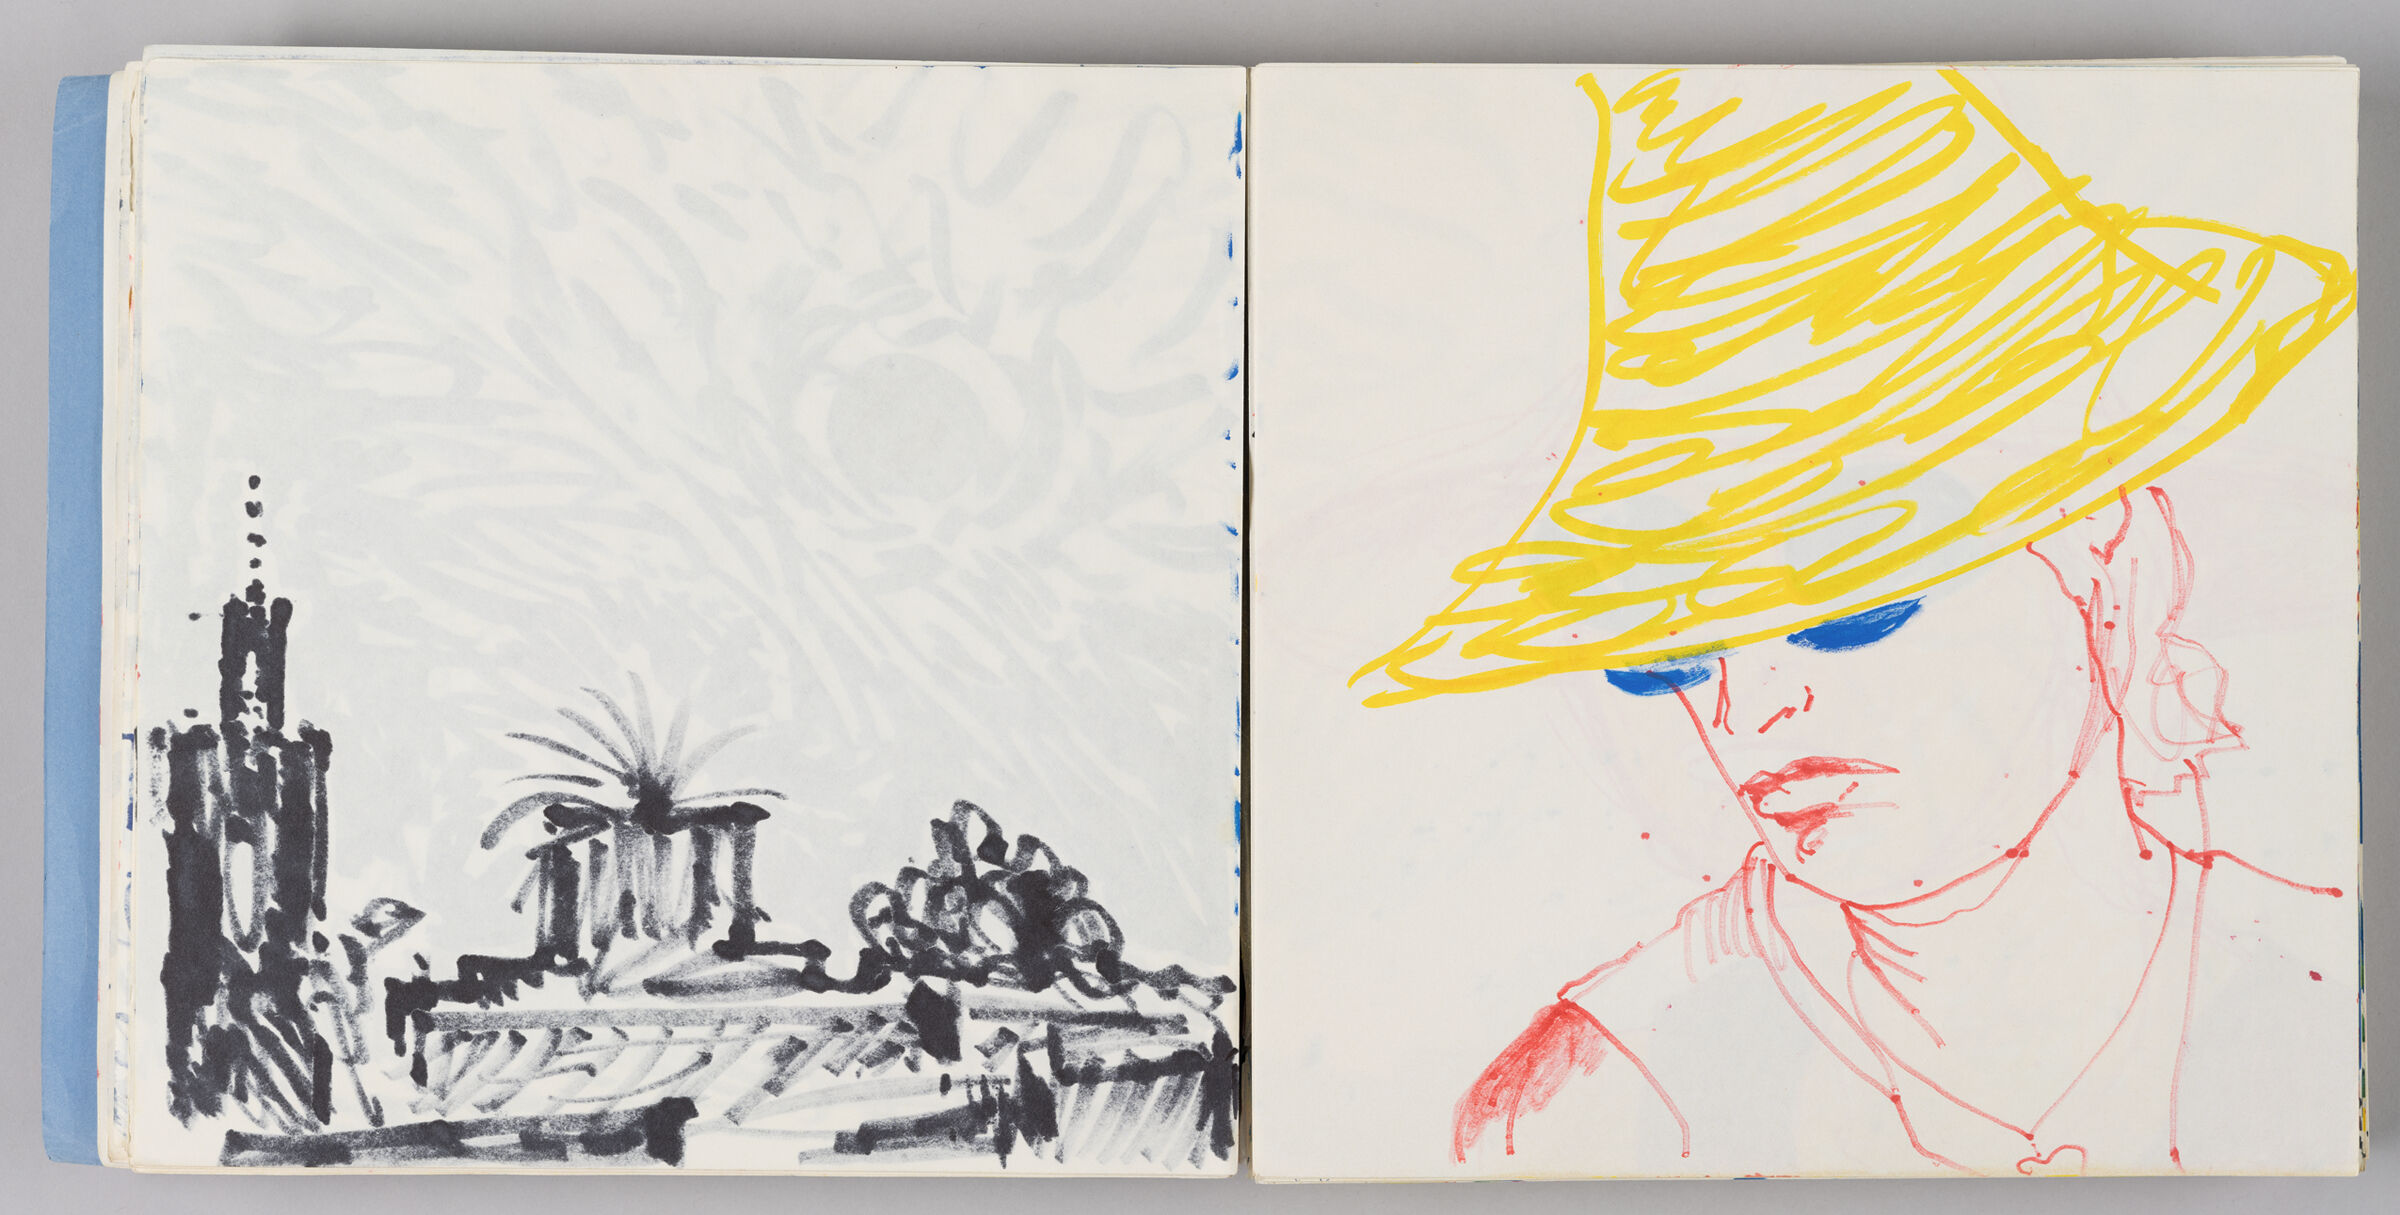 Untitled (Bleed-Through Of Previous Page And Color Transfer, Left Page); Untitled (Portrait Of Female Figure [Elizabeth] In A Hat, Right Page)
